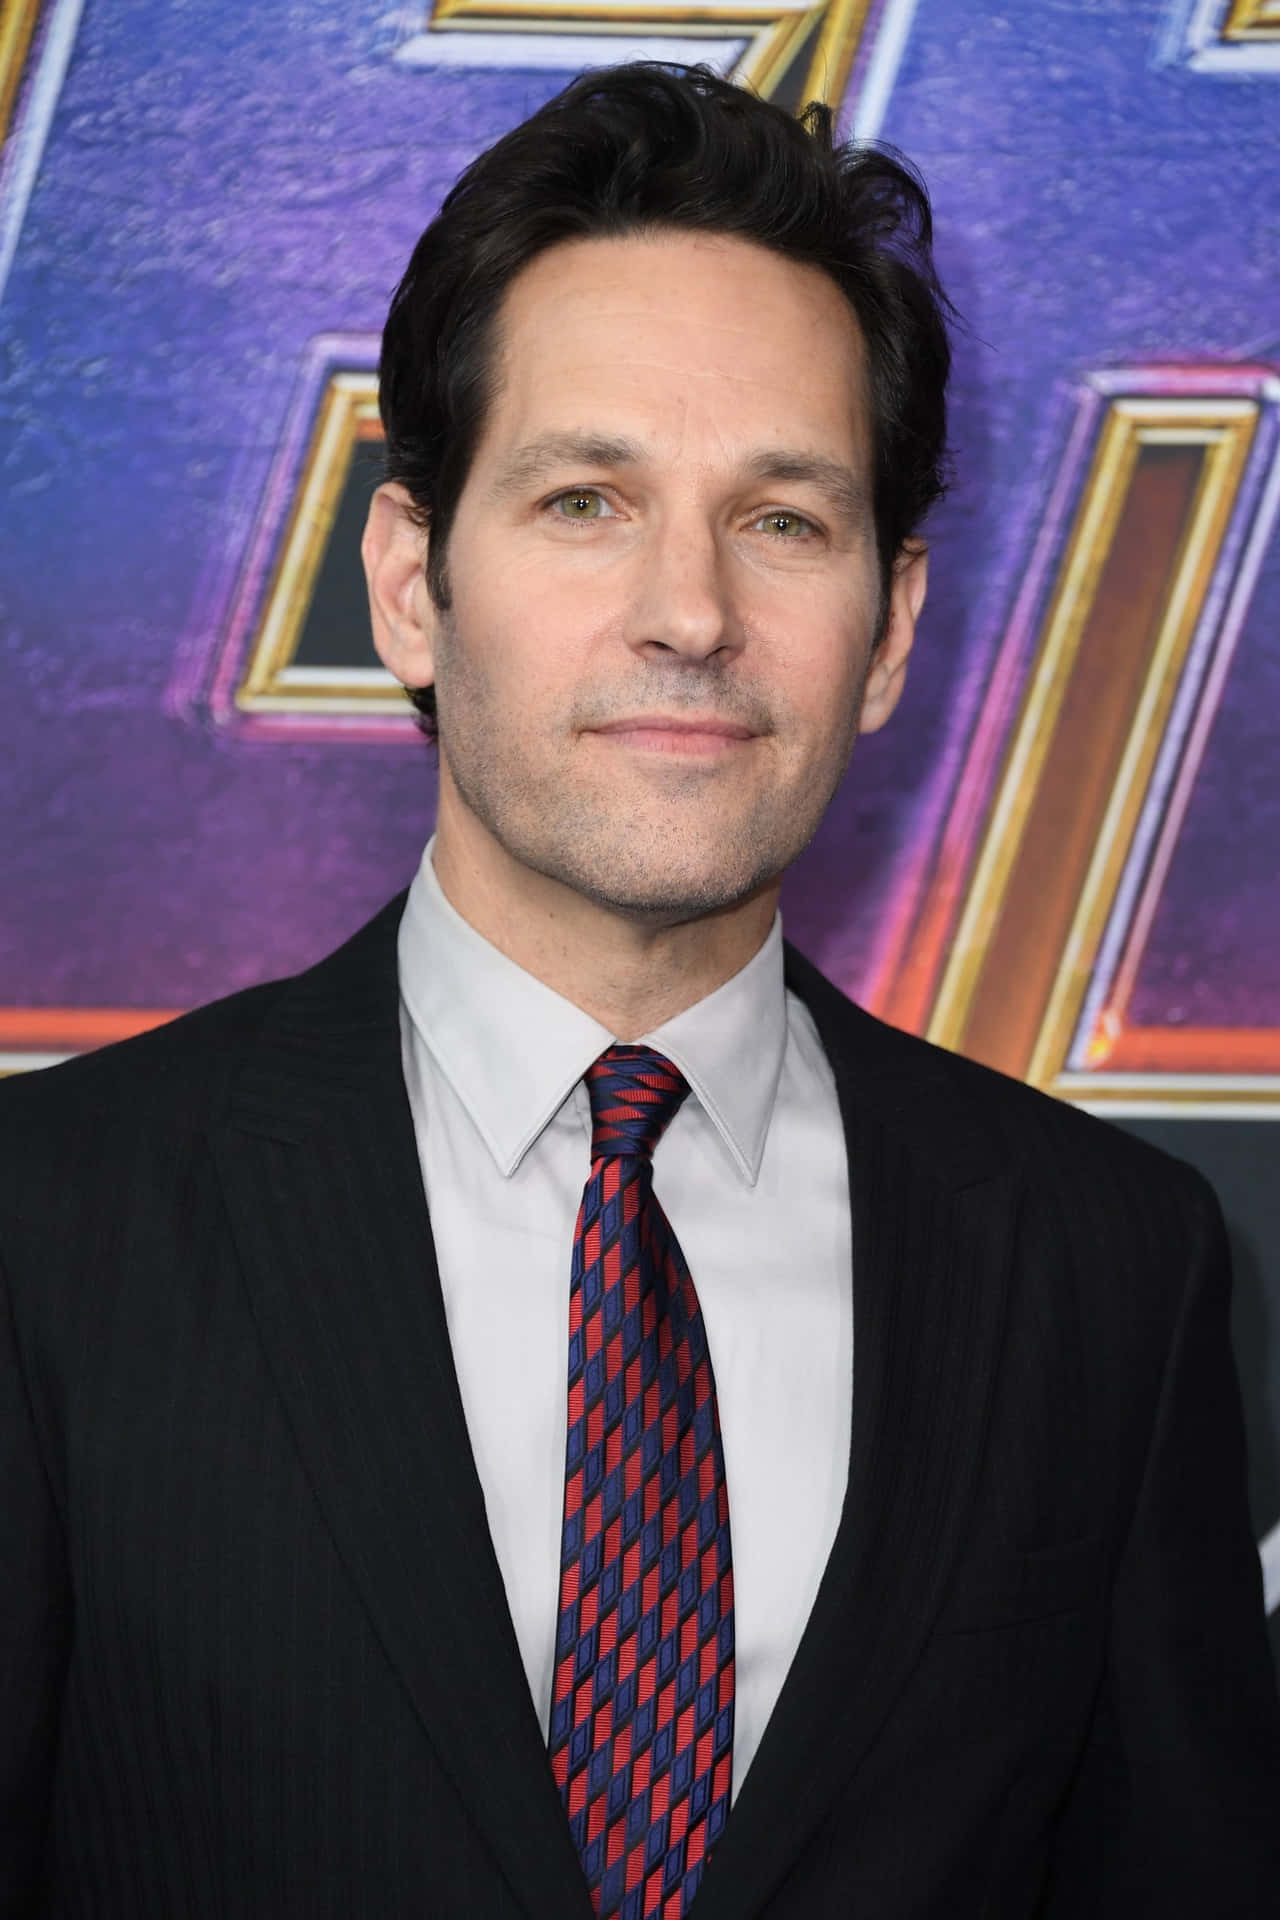 Paul Rudd in a Smiling, Relaxed Pose Wallpaper